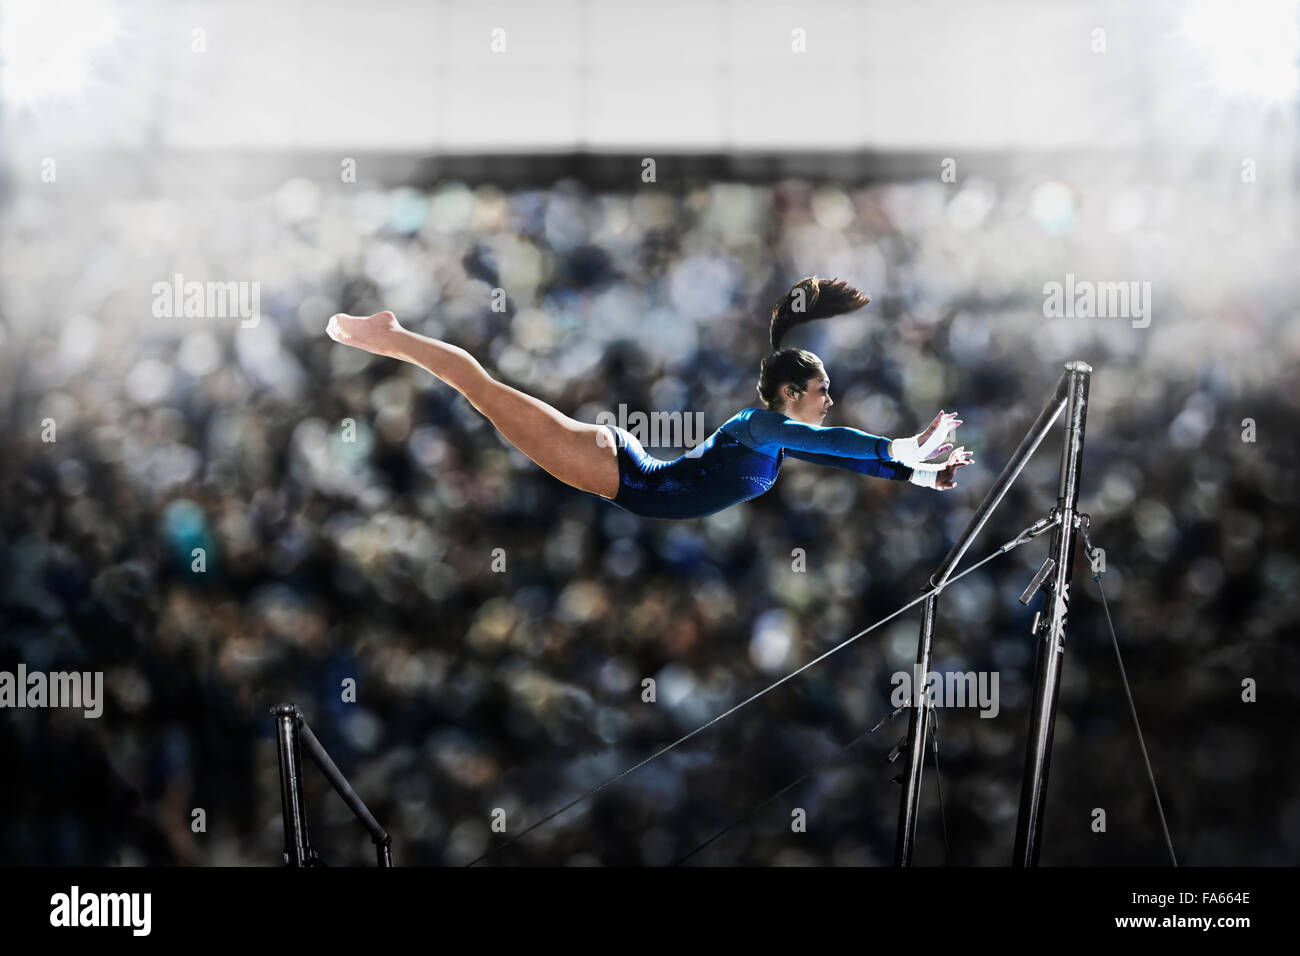 A female gymnast, a young woman performing on the parallel bars, in mid flight reaching towards the top bar. Stock Photo